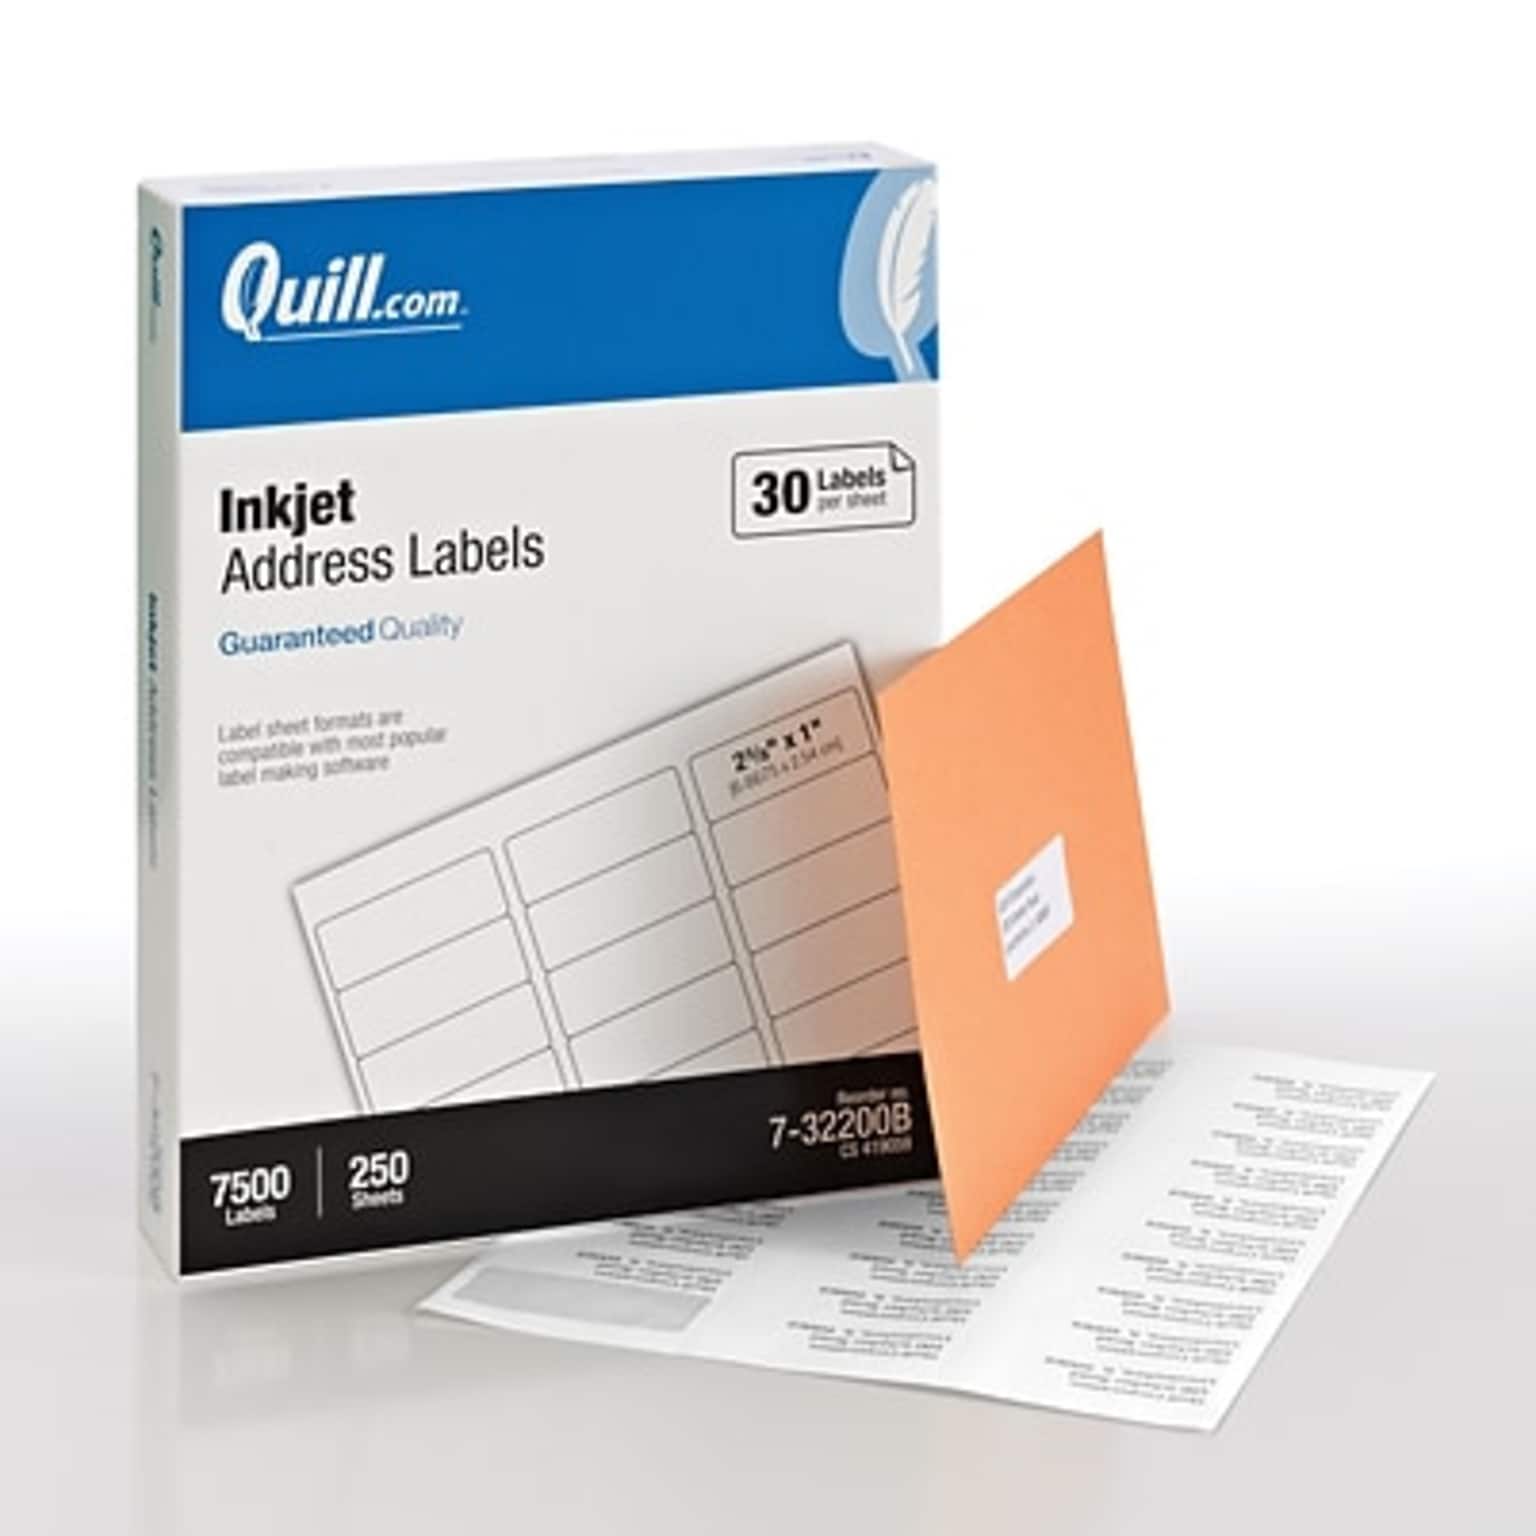 Quill Brand® Inkjet Address Labels, 1 x 2-5/8, White, 30 labels/Sheet, 250 Sheets/Box (Comparable to Avery 8160)